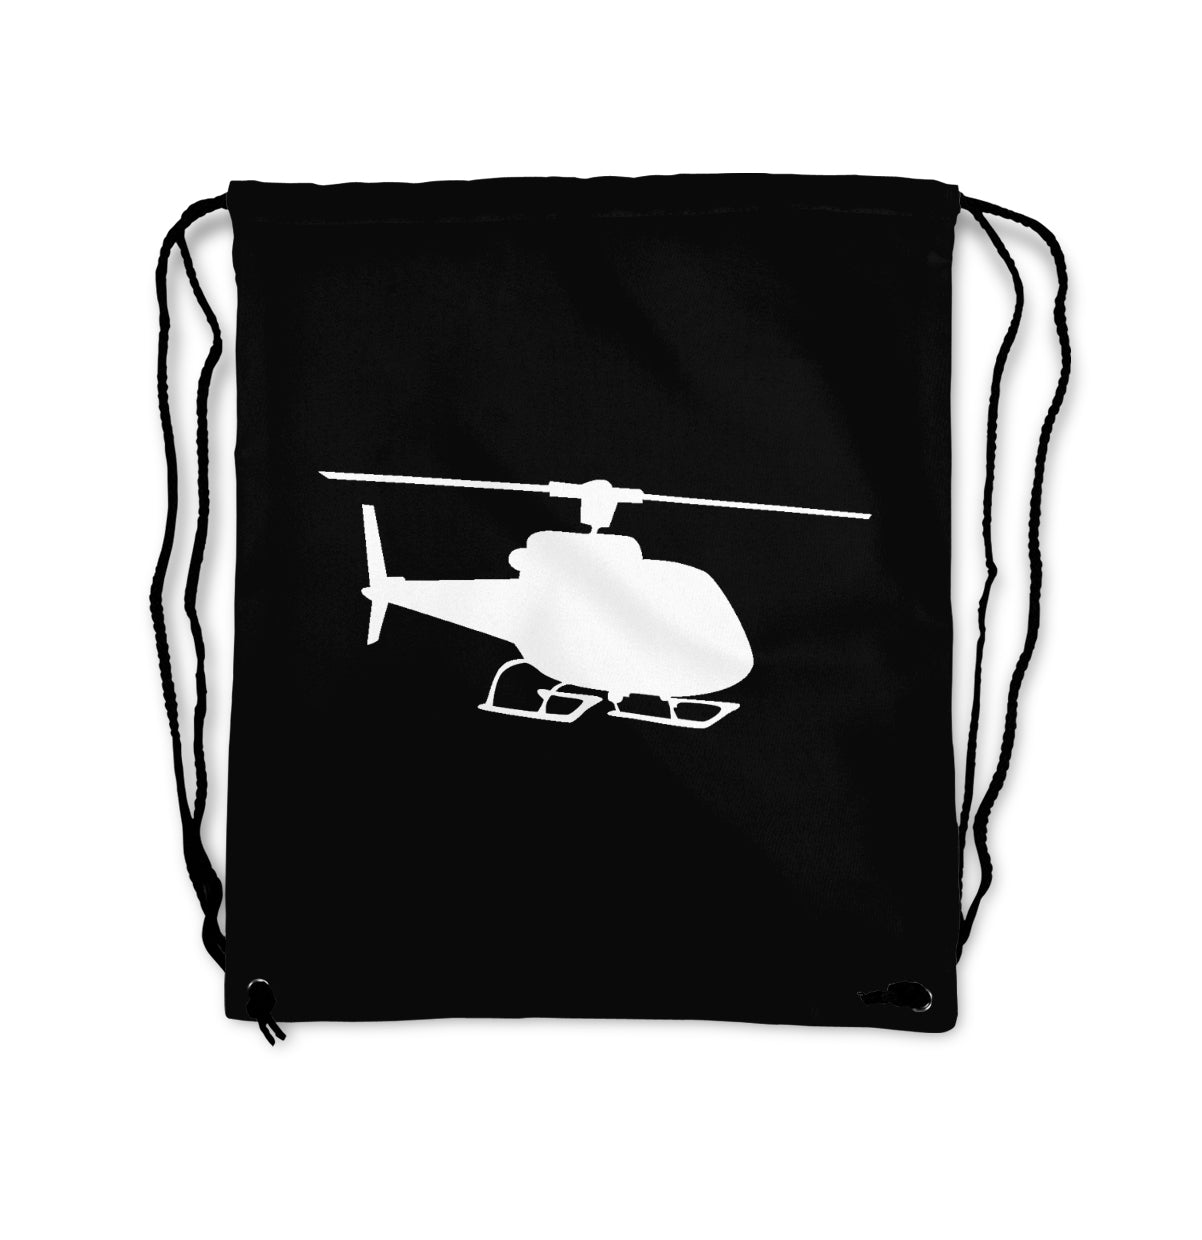 Helicopter Designed Drawstring Bags